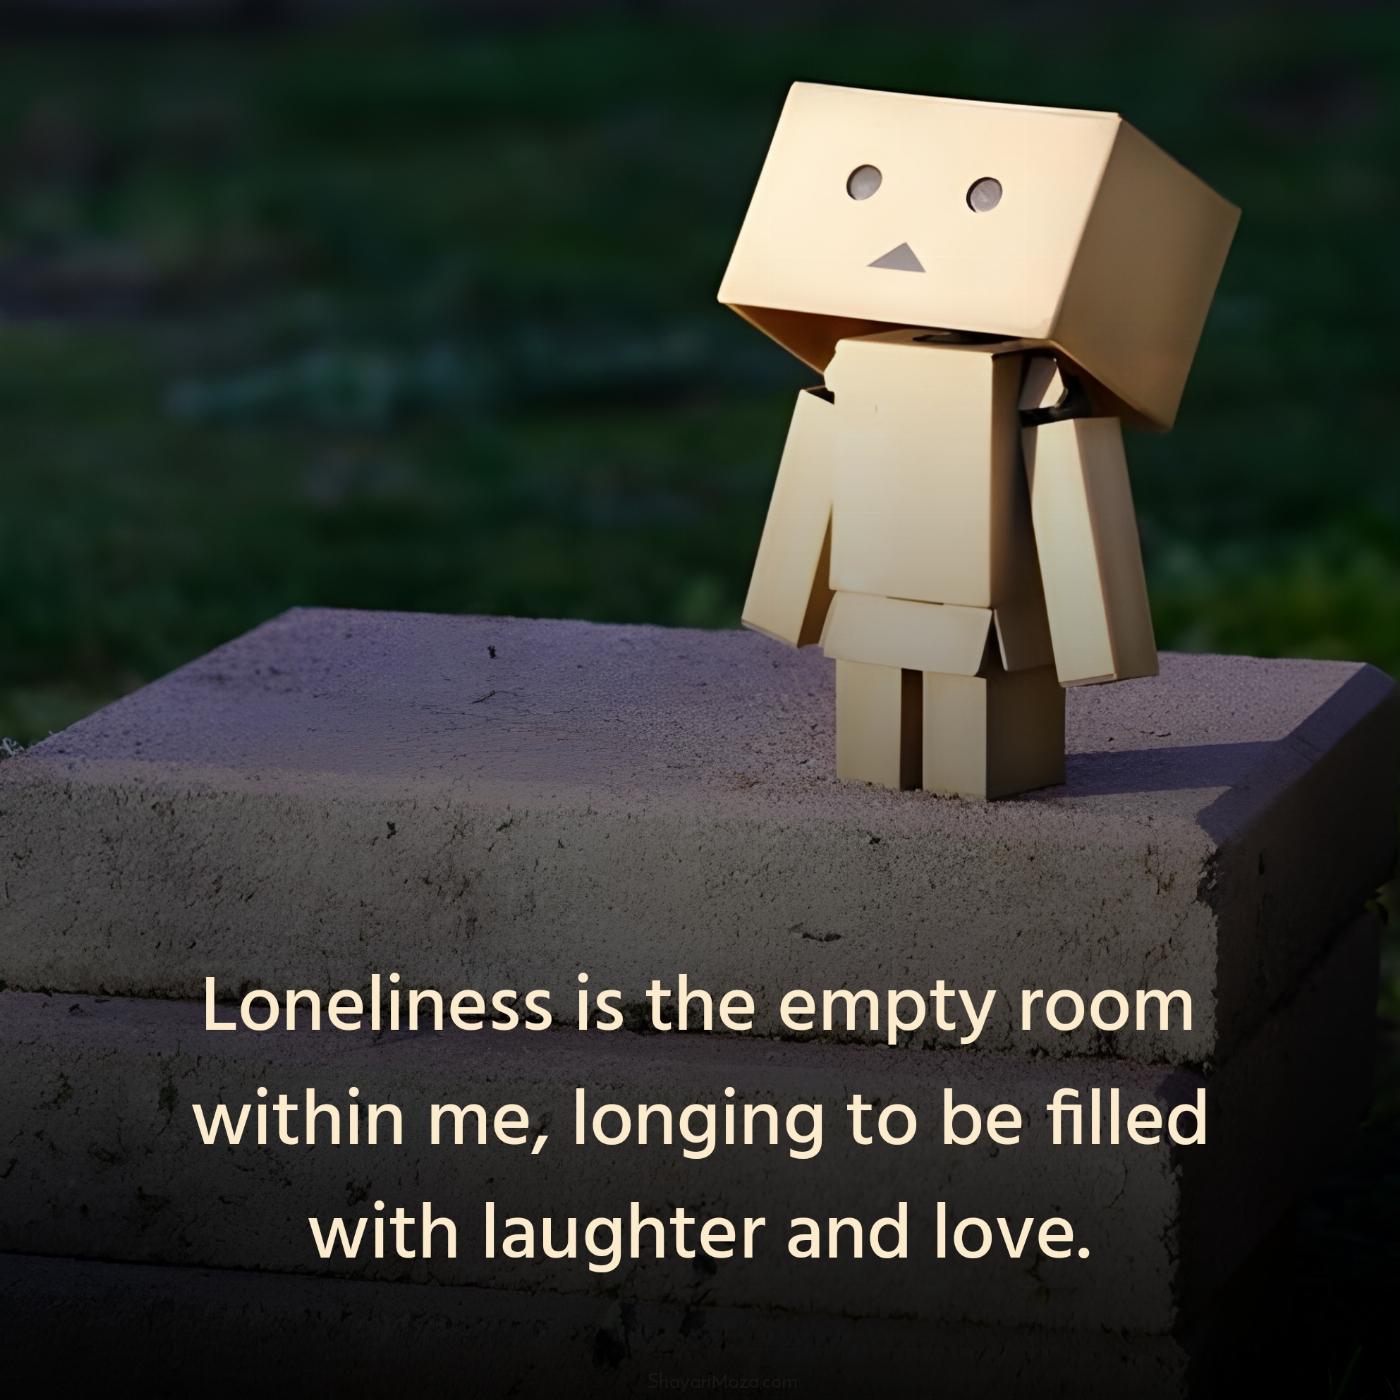 Loneliness is the empty room within me longing to be filled